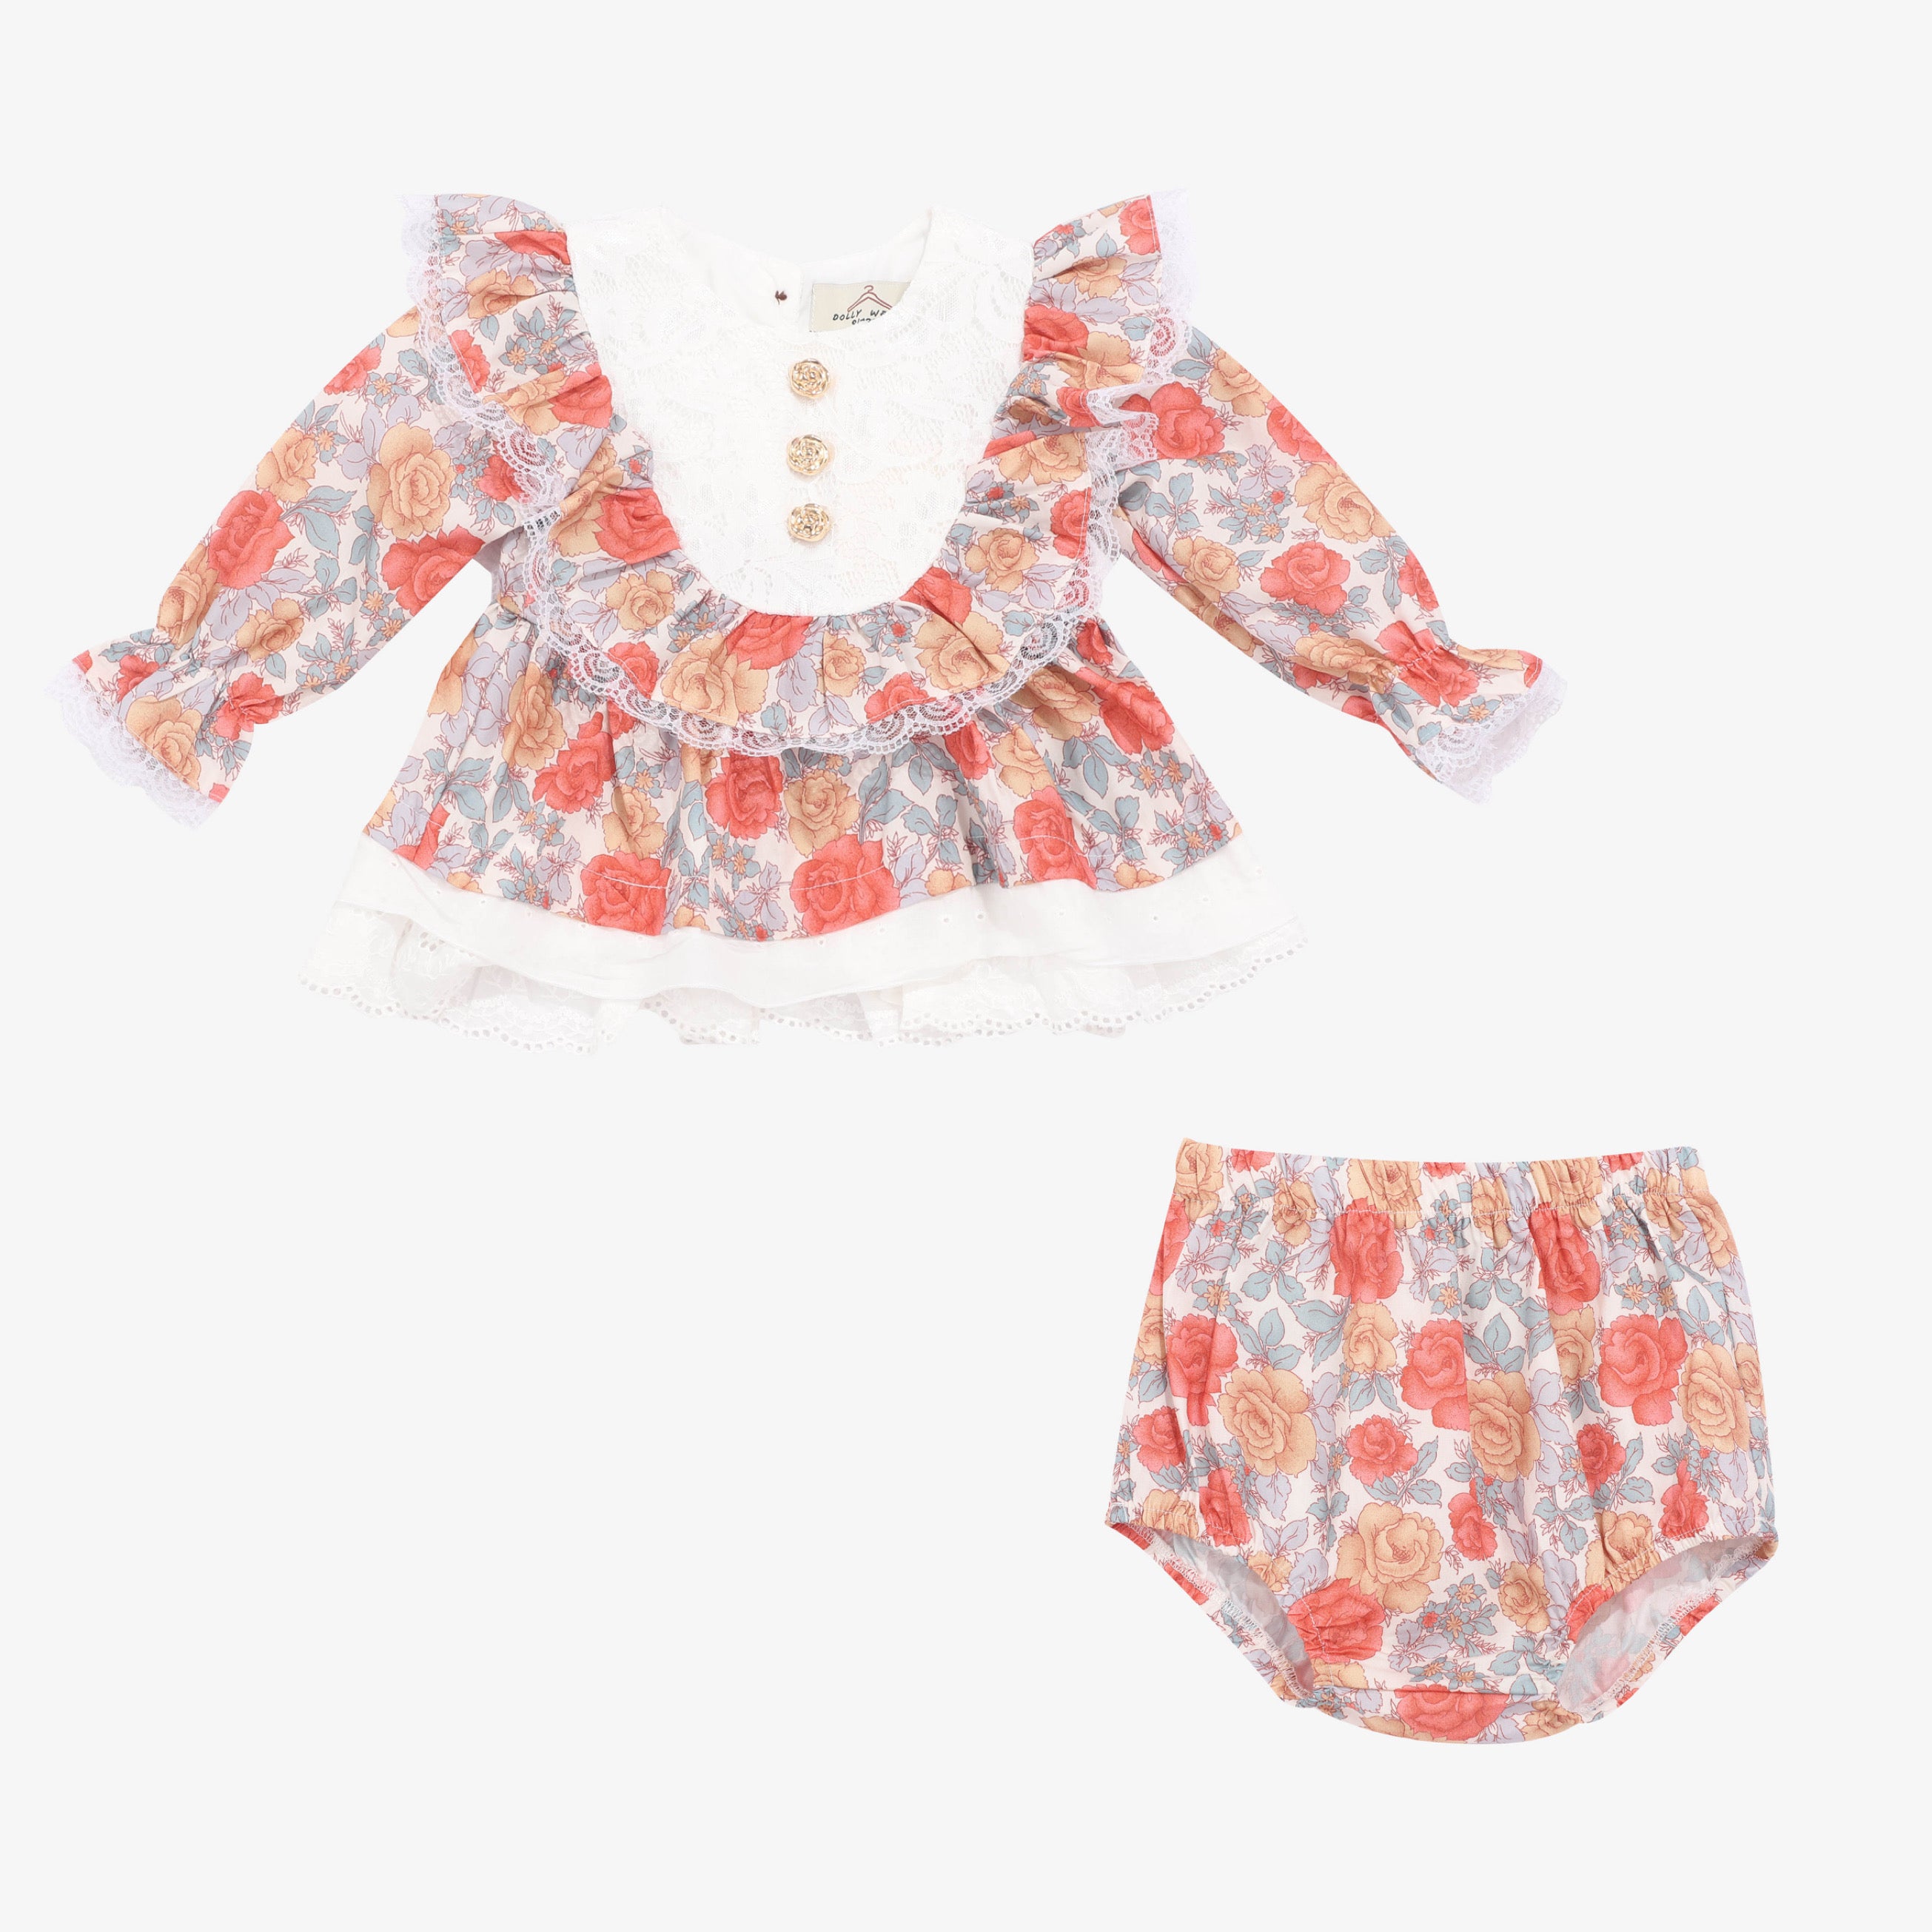 Sophia buttoned Limited addition two piece